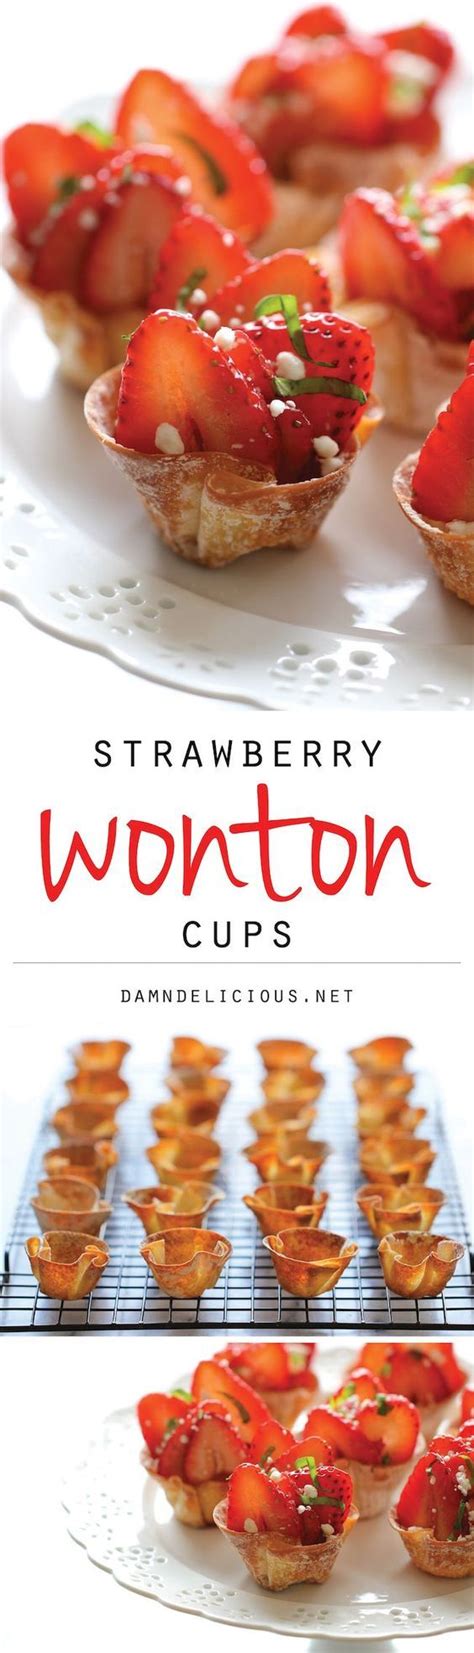 View top rated wonton wrappers dessert recipes with ratings and reviews. Strawberry Wonton Cups | Recipe | Wonton cups, Food, Yummy food